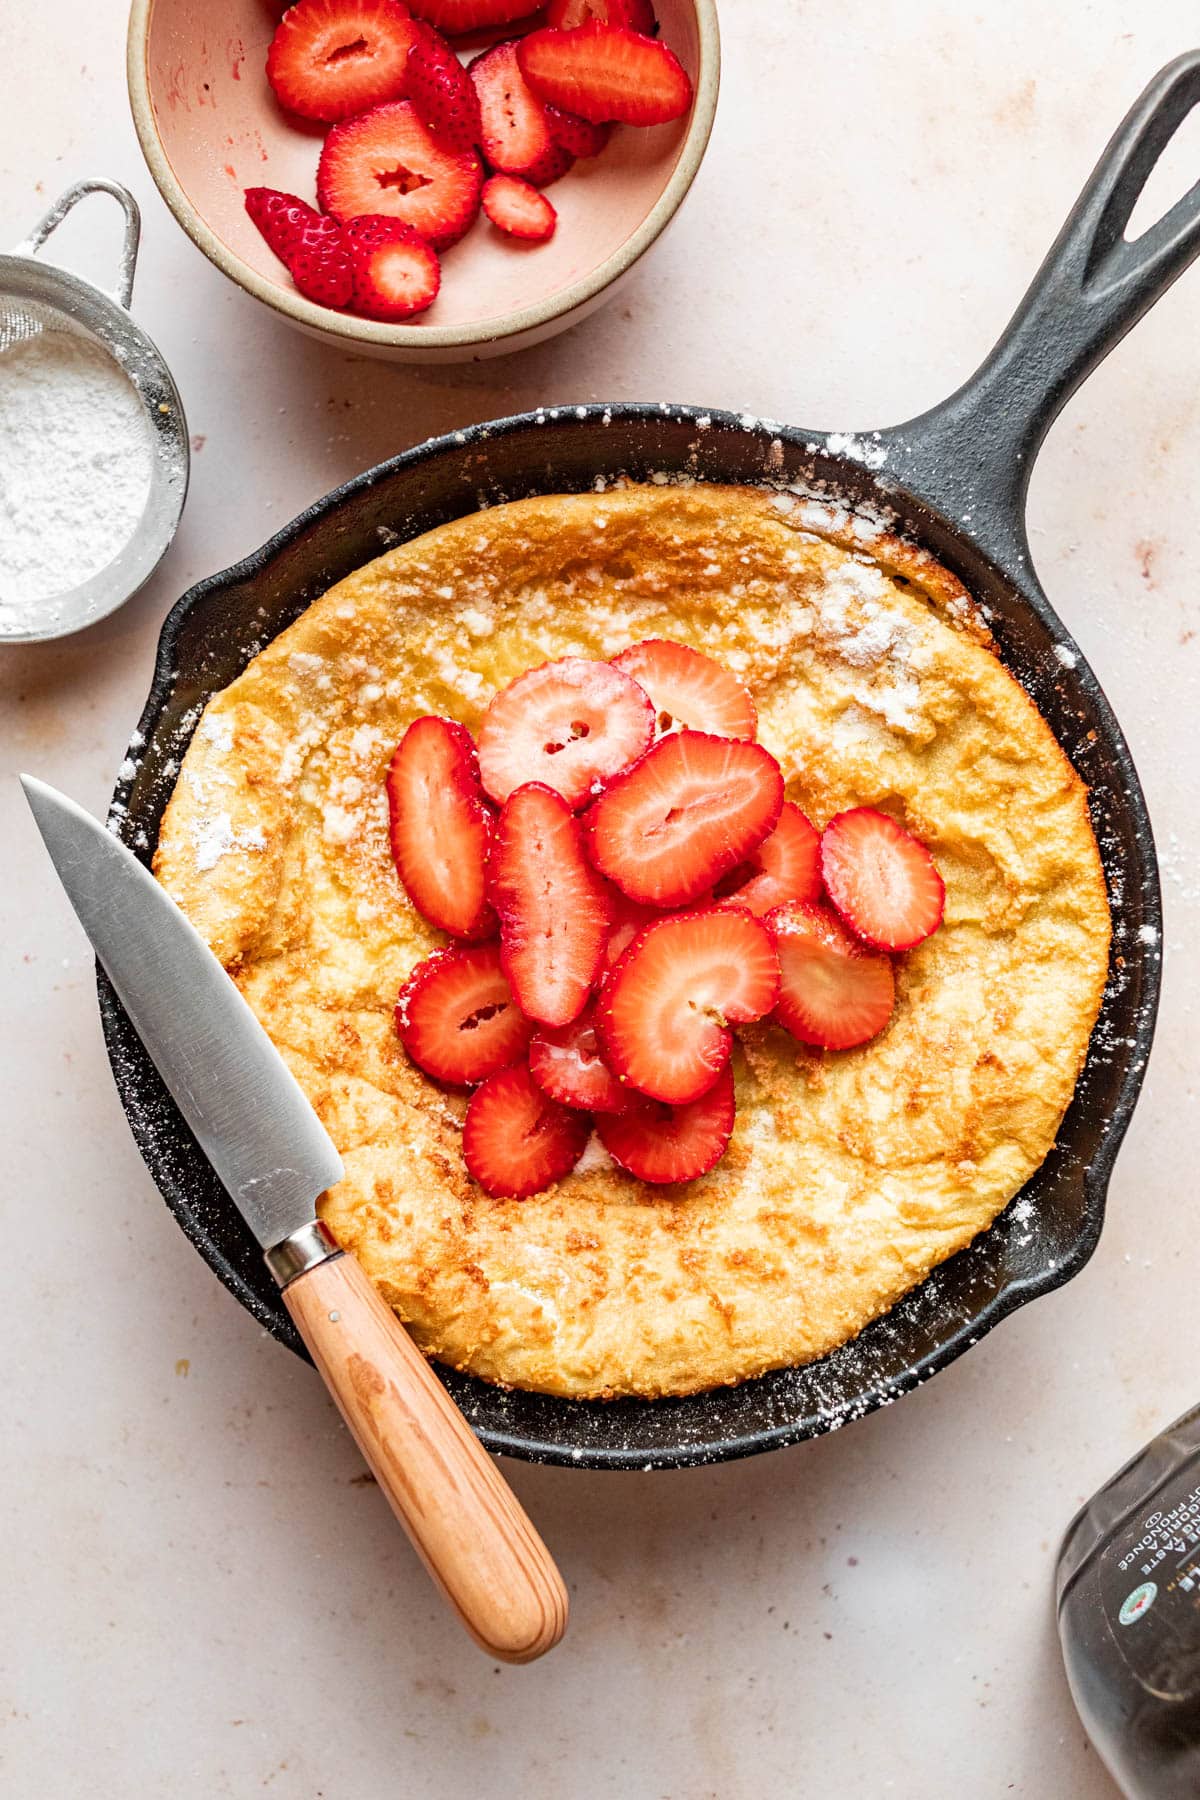 A baked pancake in a cast-iron skillet topped with fresh sliced strawberries.